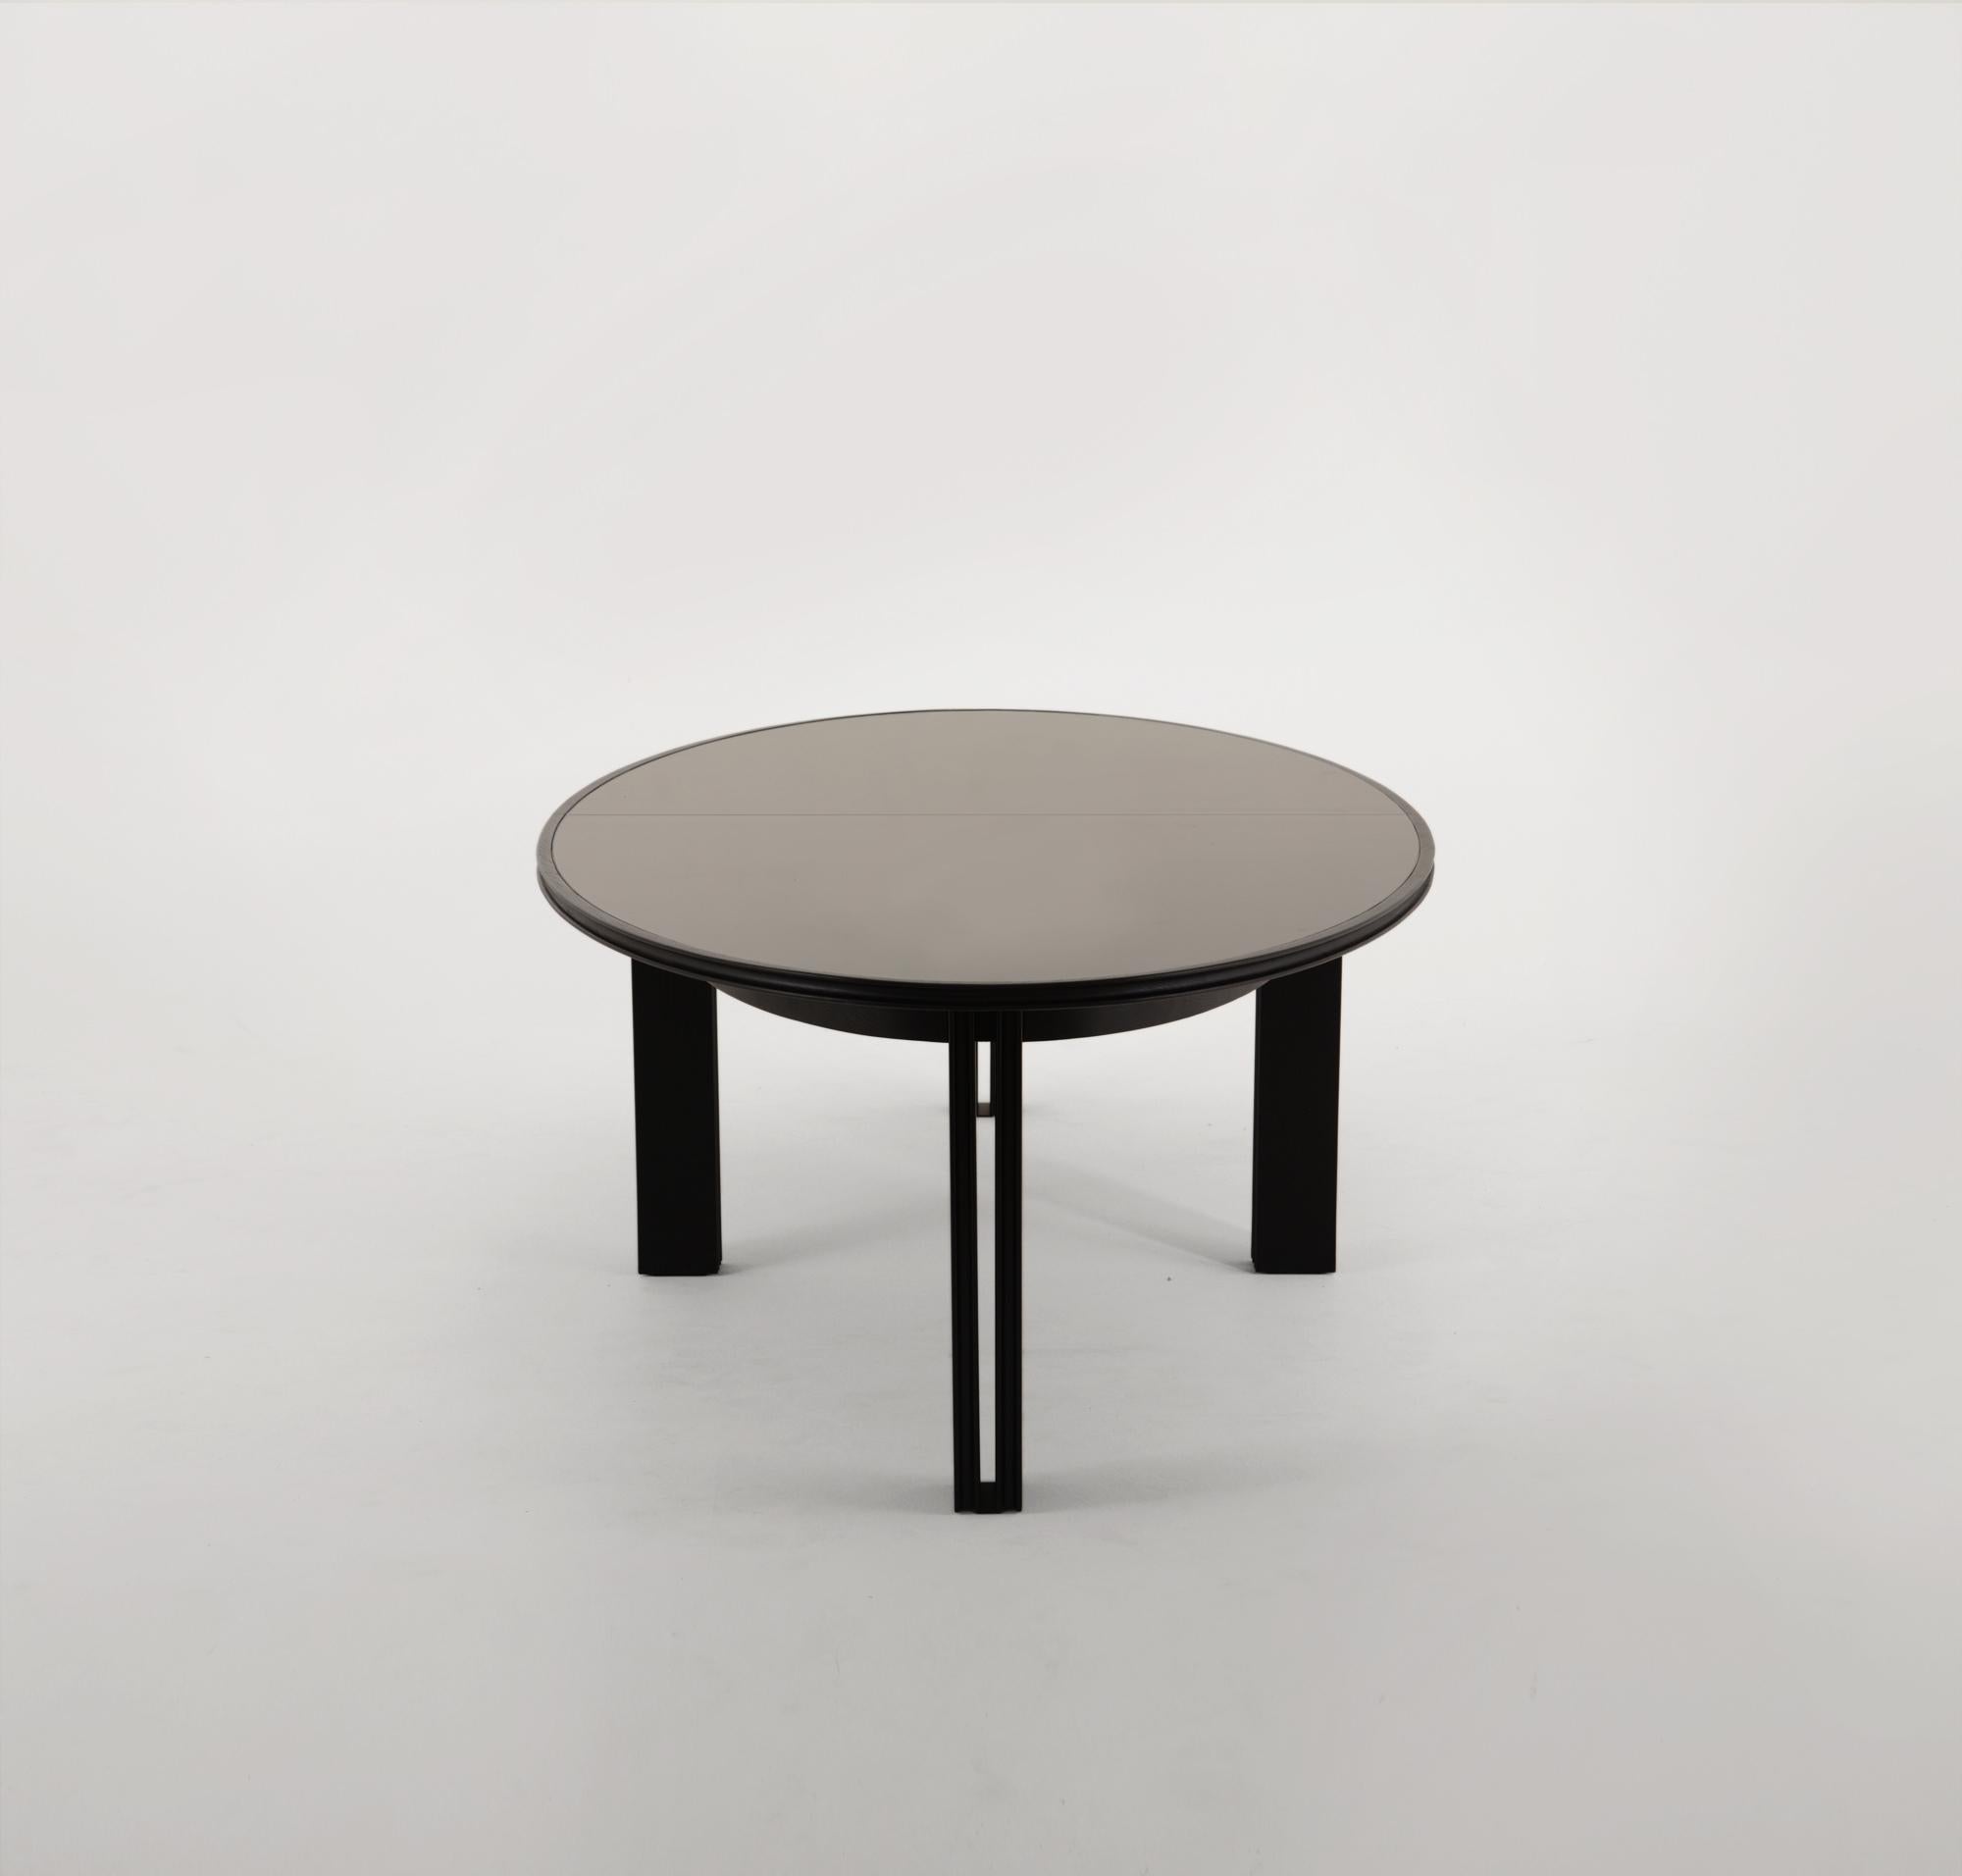 Vivien's table is crafted from a solid dyed oak tabletop, encasing two pieces of bronze glass that sit on eight hardwood oak legs. A concave profile carves the edges of the tabletop, and follows down the interior and exterior of the eight legs. The